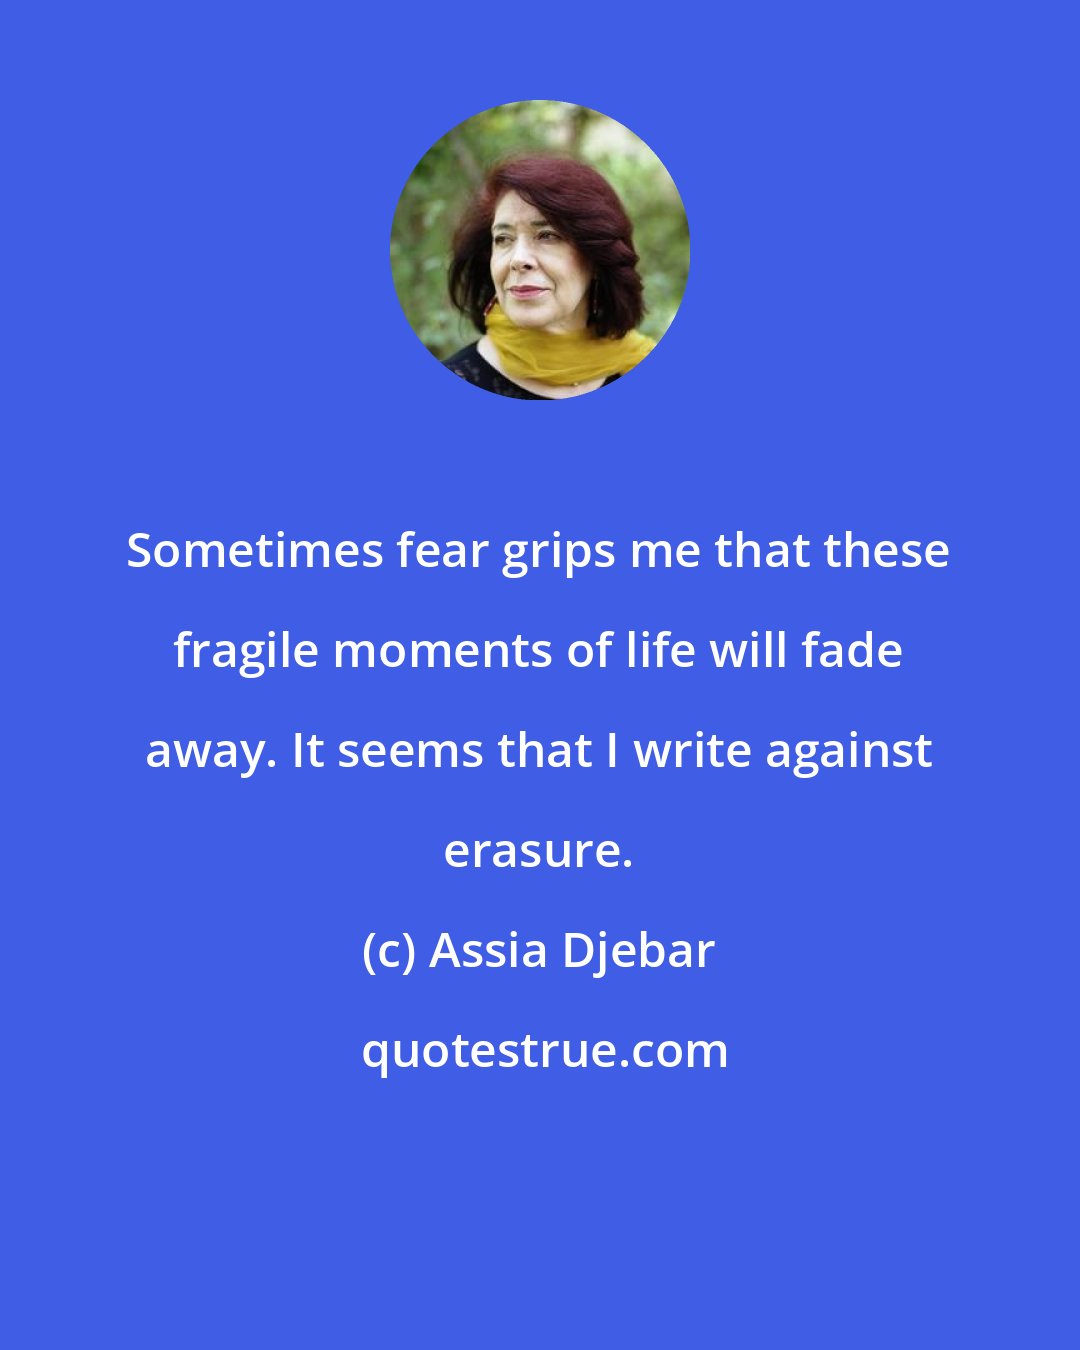 Assia Djebar: Sometimes fear grips me that these fragile moments of life will fade away. It seems that I write against erasure.